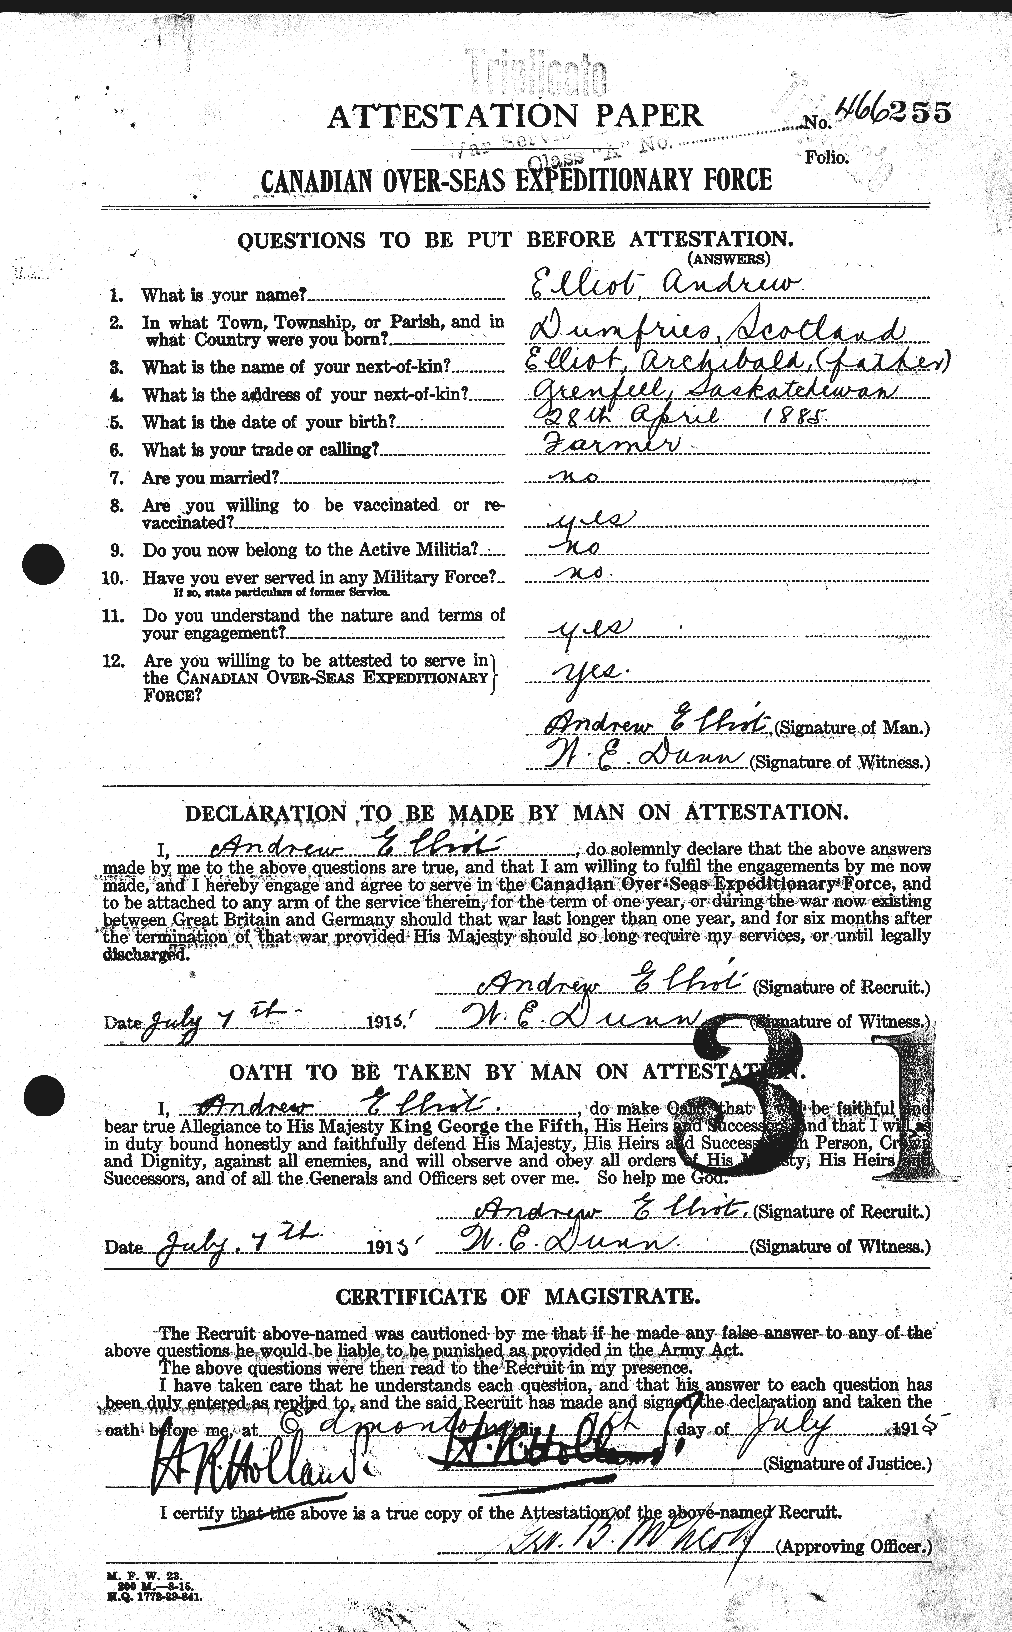 Personnel Records of the First World War - CEF 310730a